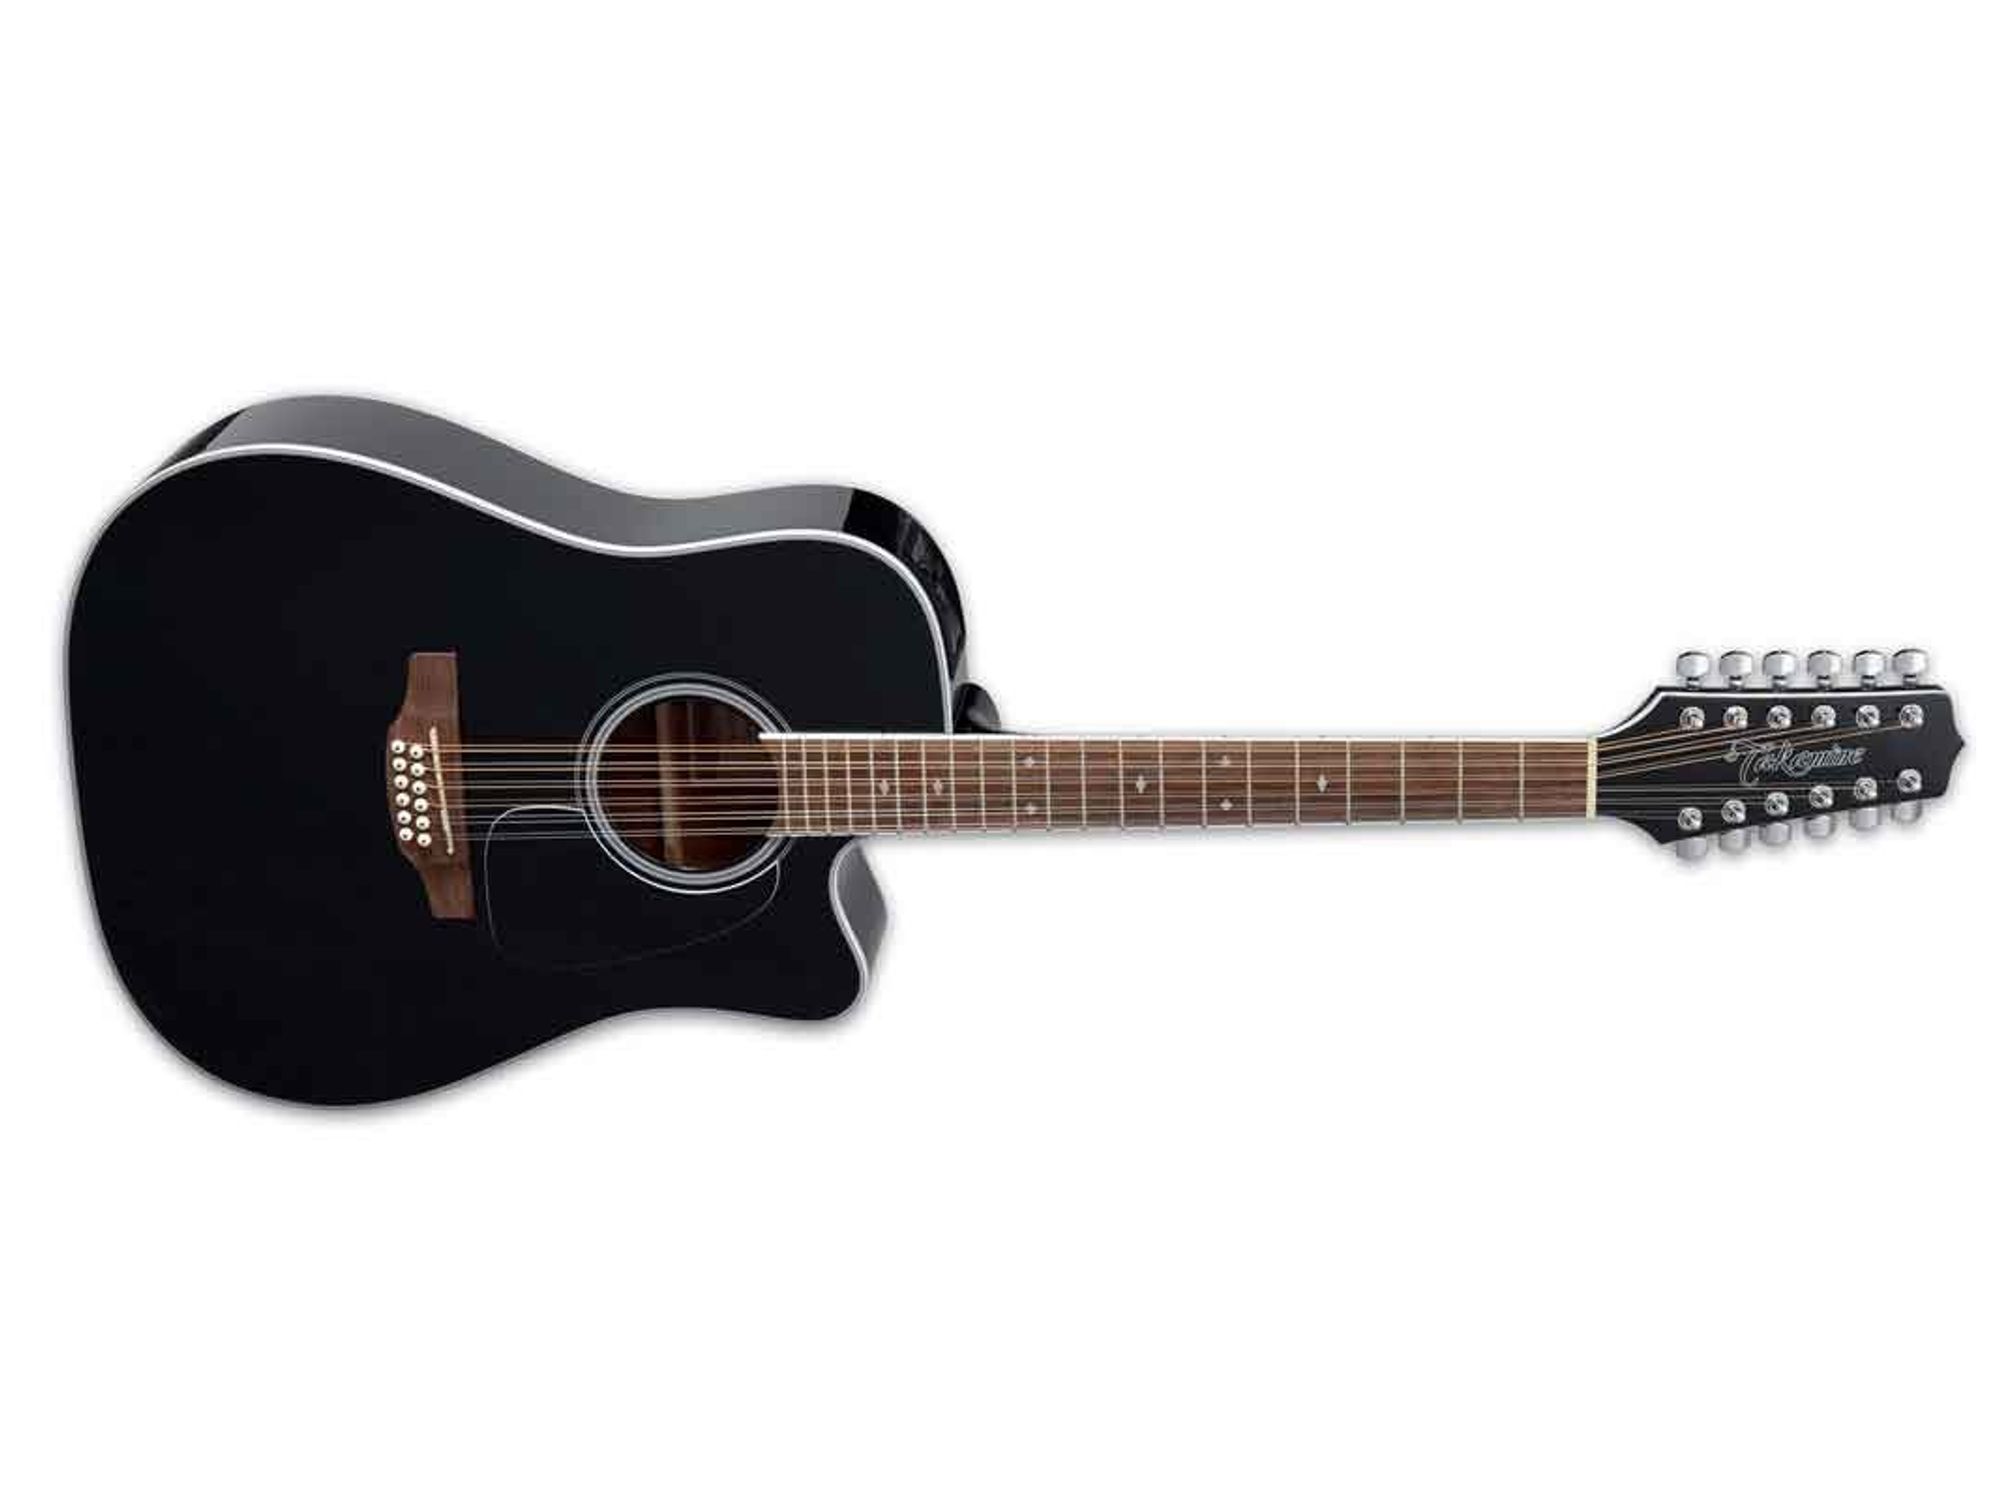 Takamine Guitars Debuts New Additions to Popular G Series